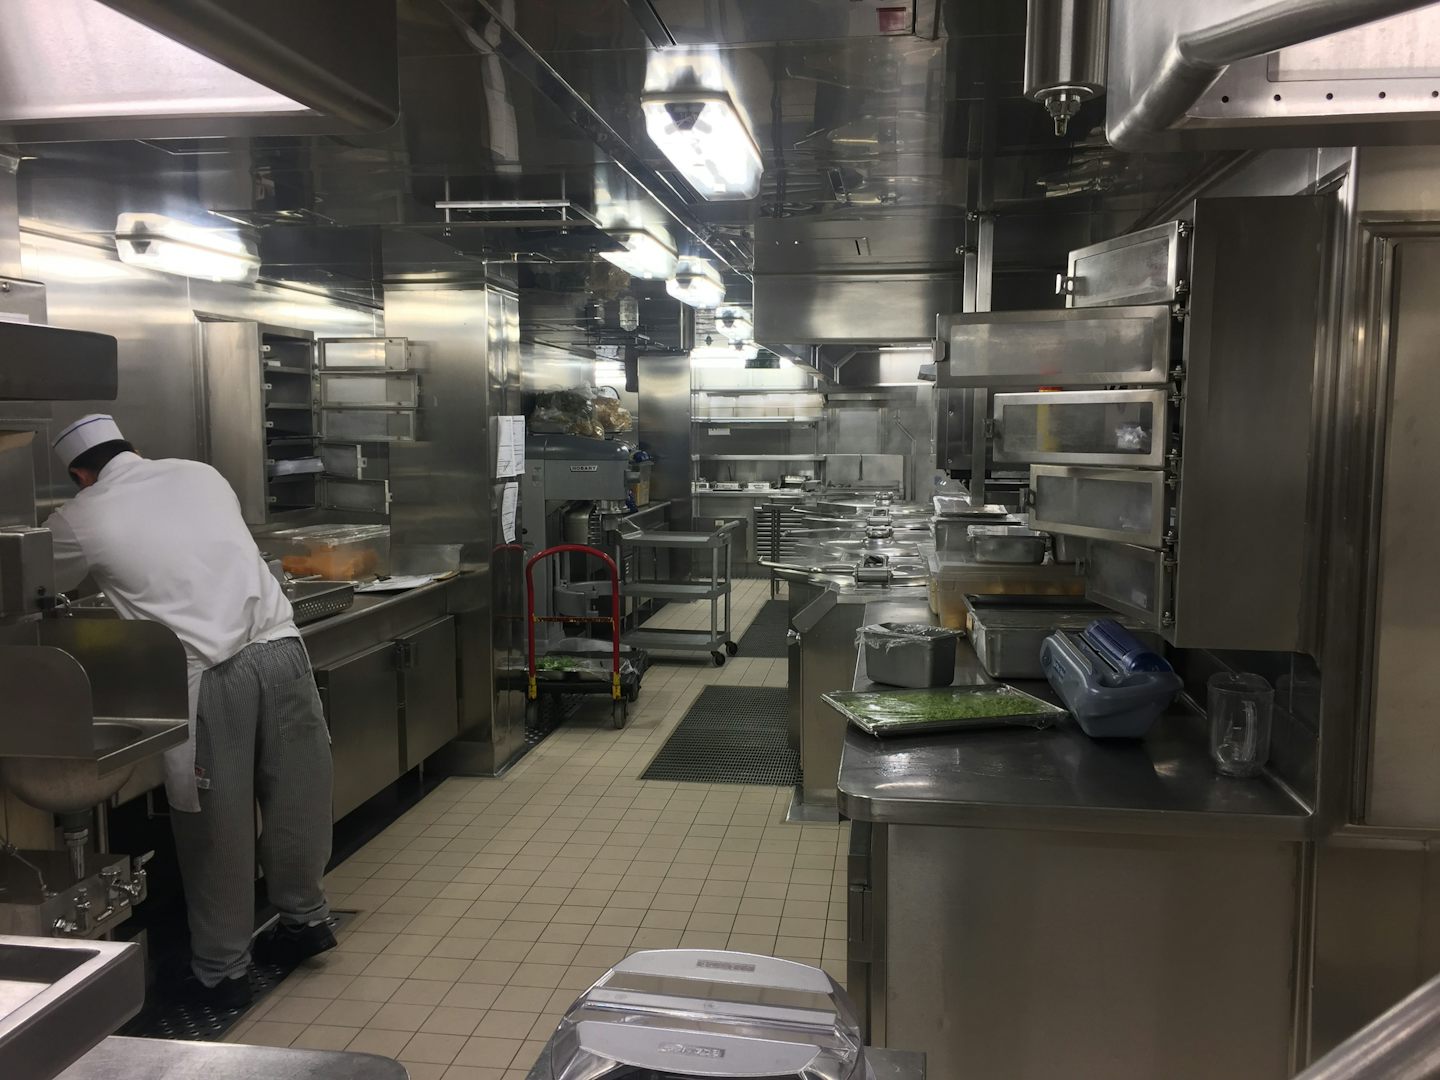 Busy galley preparations.